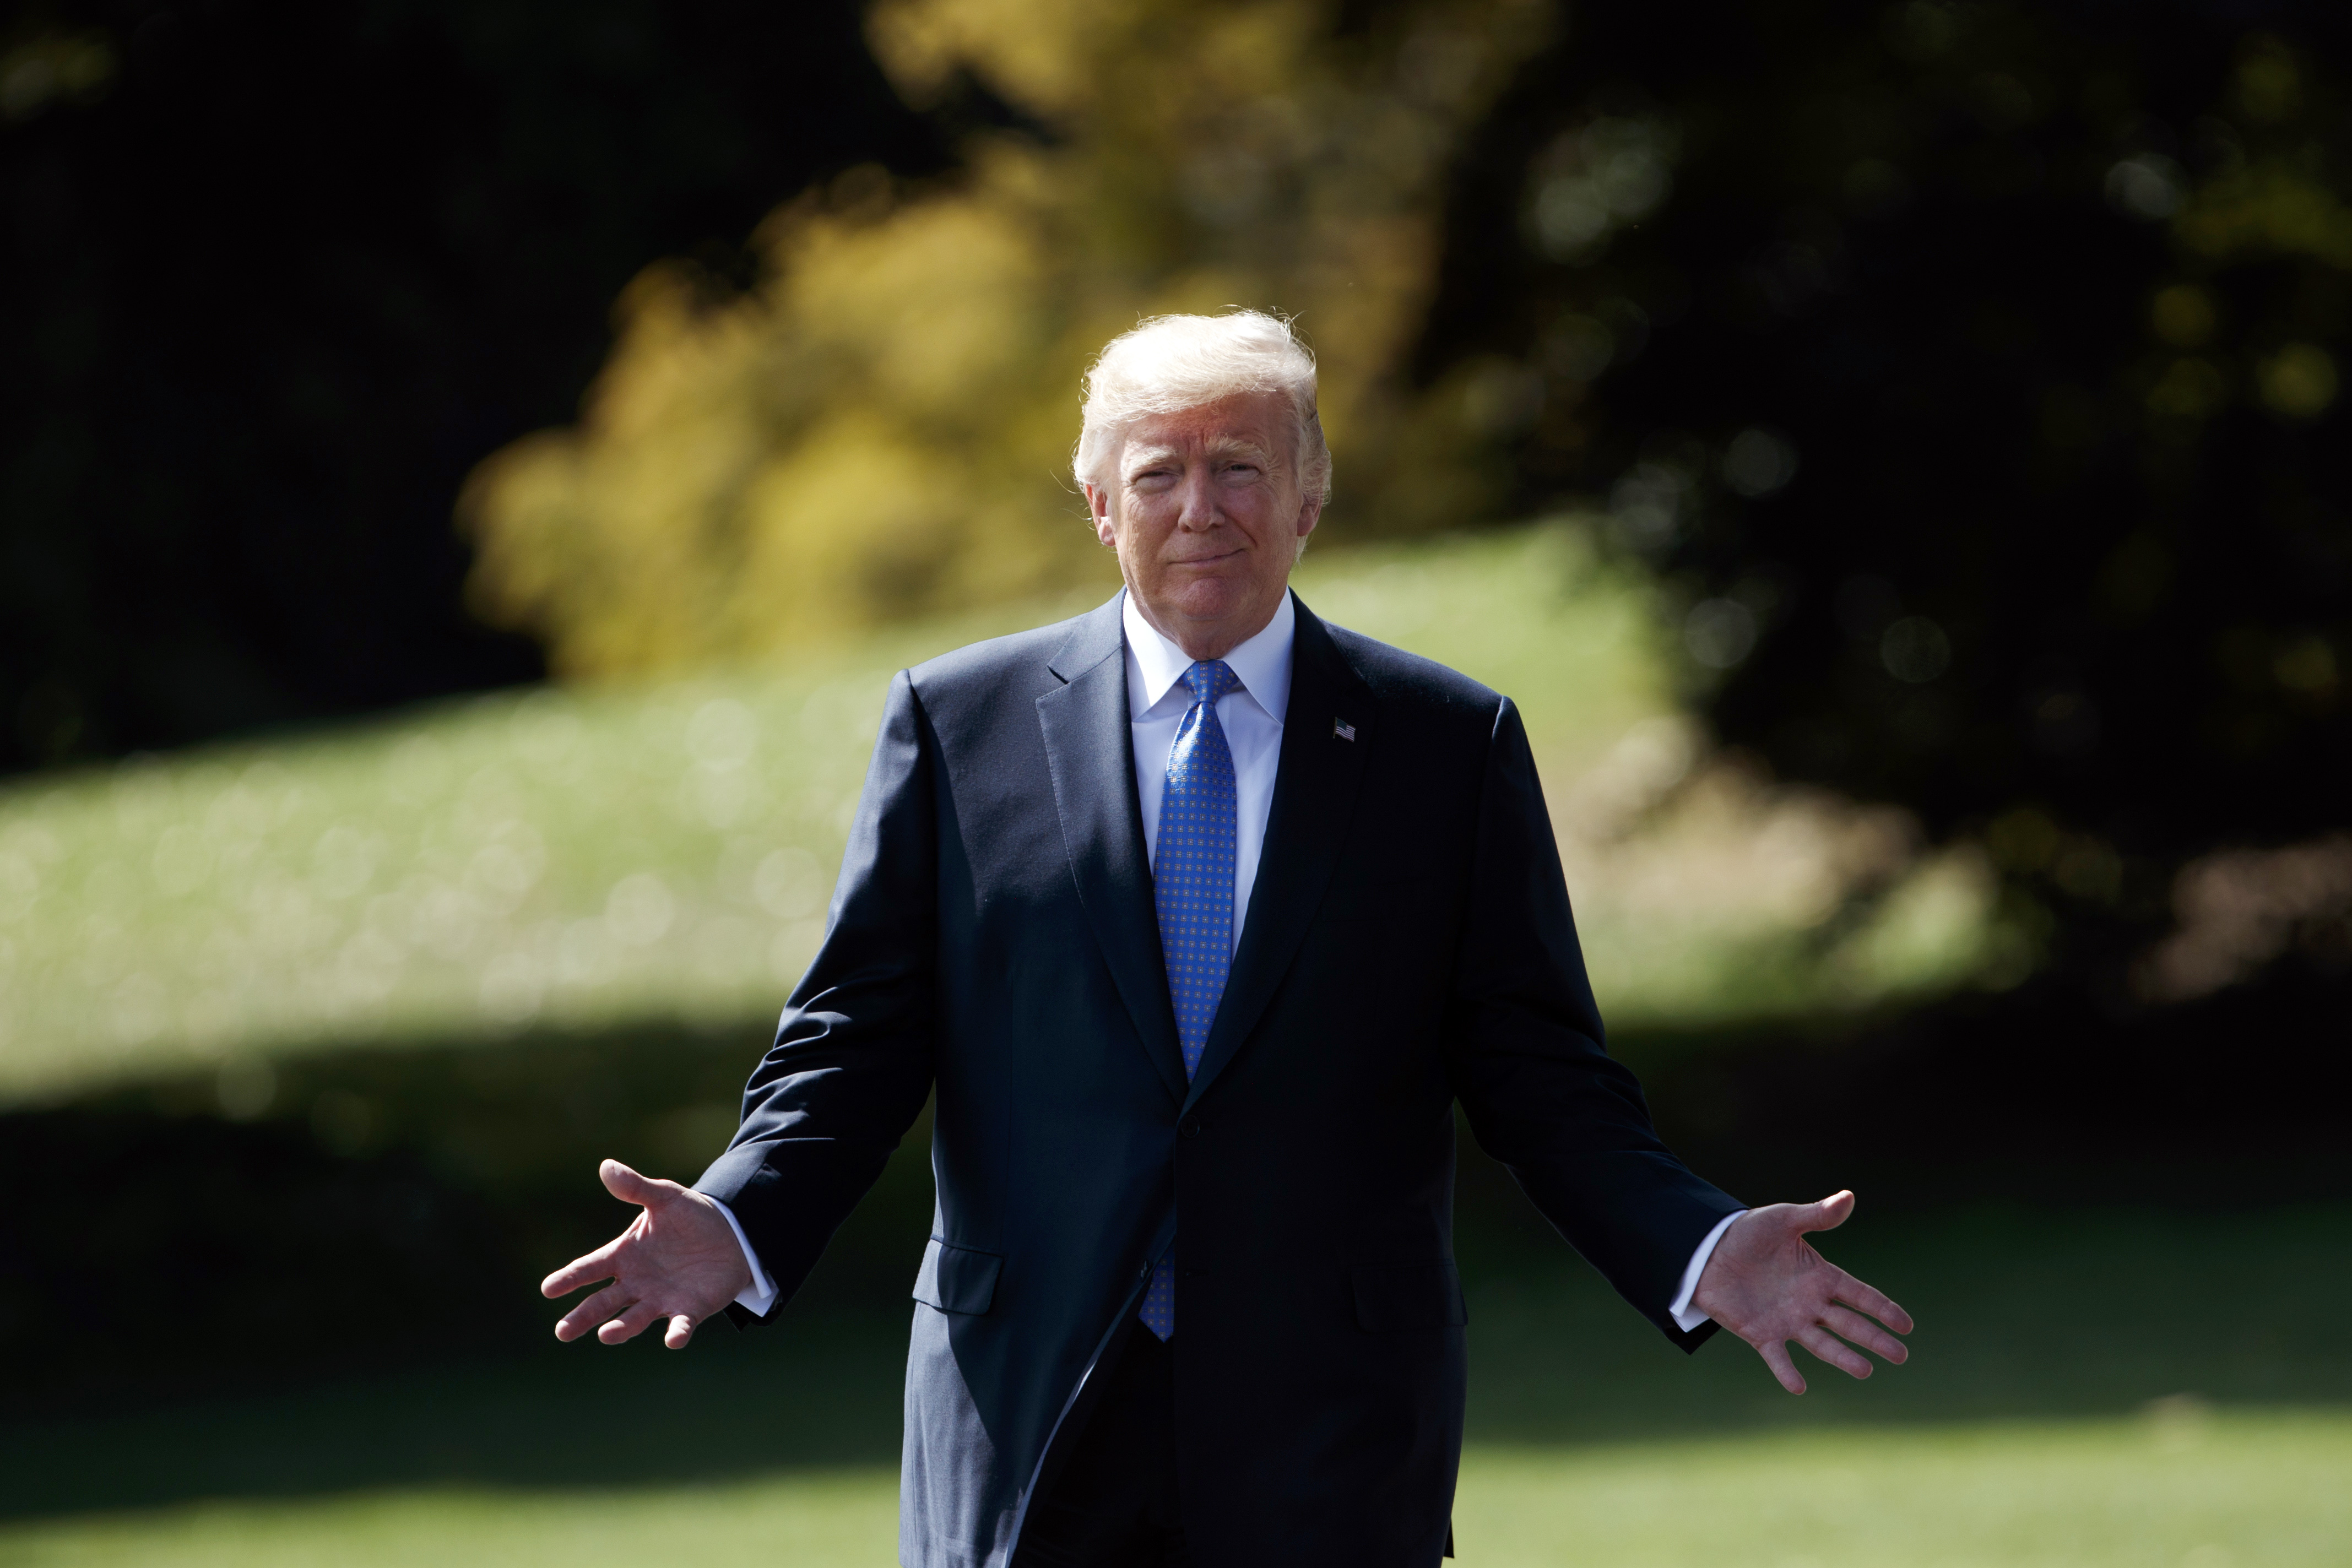 President Donald Trump walks to speak to reporters as he walks to board Marine One on the South Lawn of the White House, Wednesday, Sept. 27, 2017, in Washington. (Evan Vucci&mdash;AP)